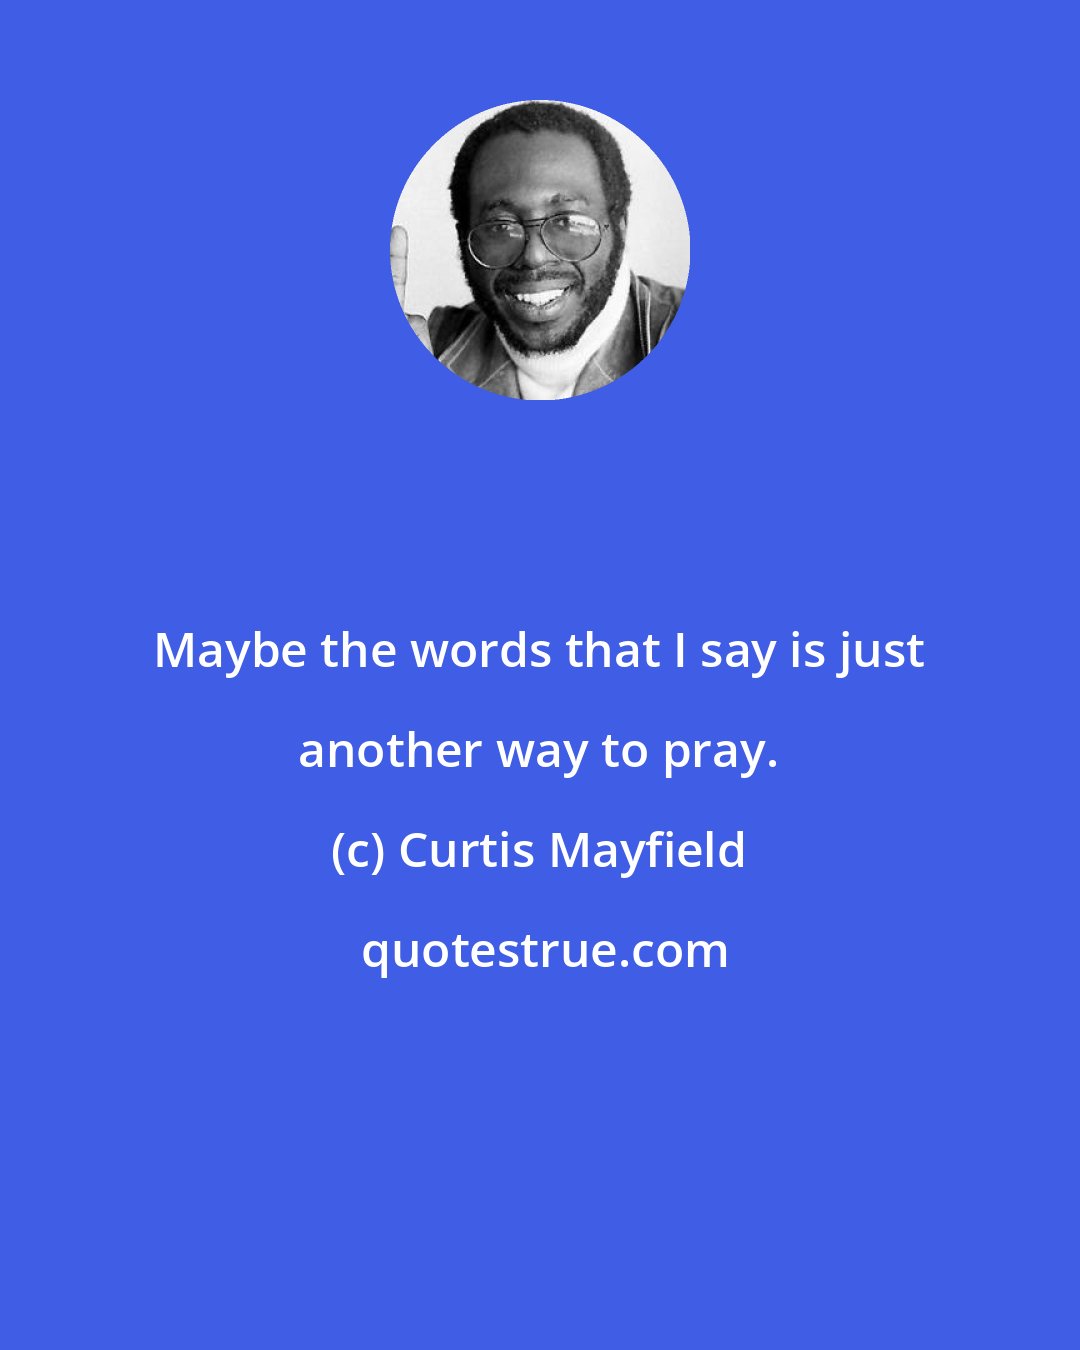 Curtis Mayfield: Maybe the words that I say is just another way to pray.